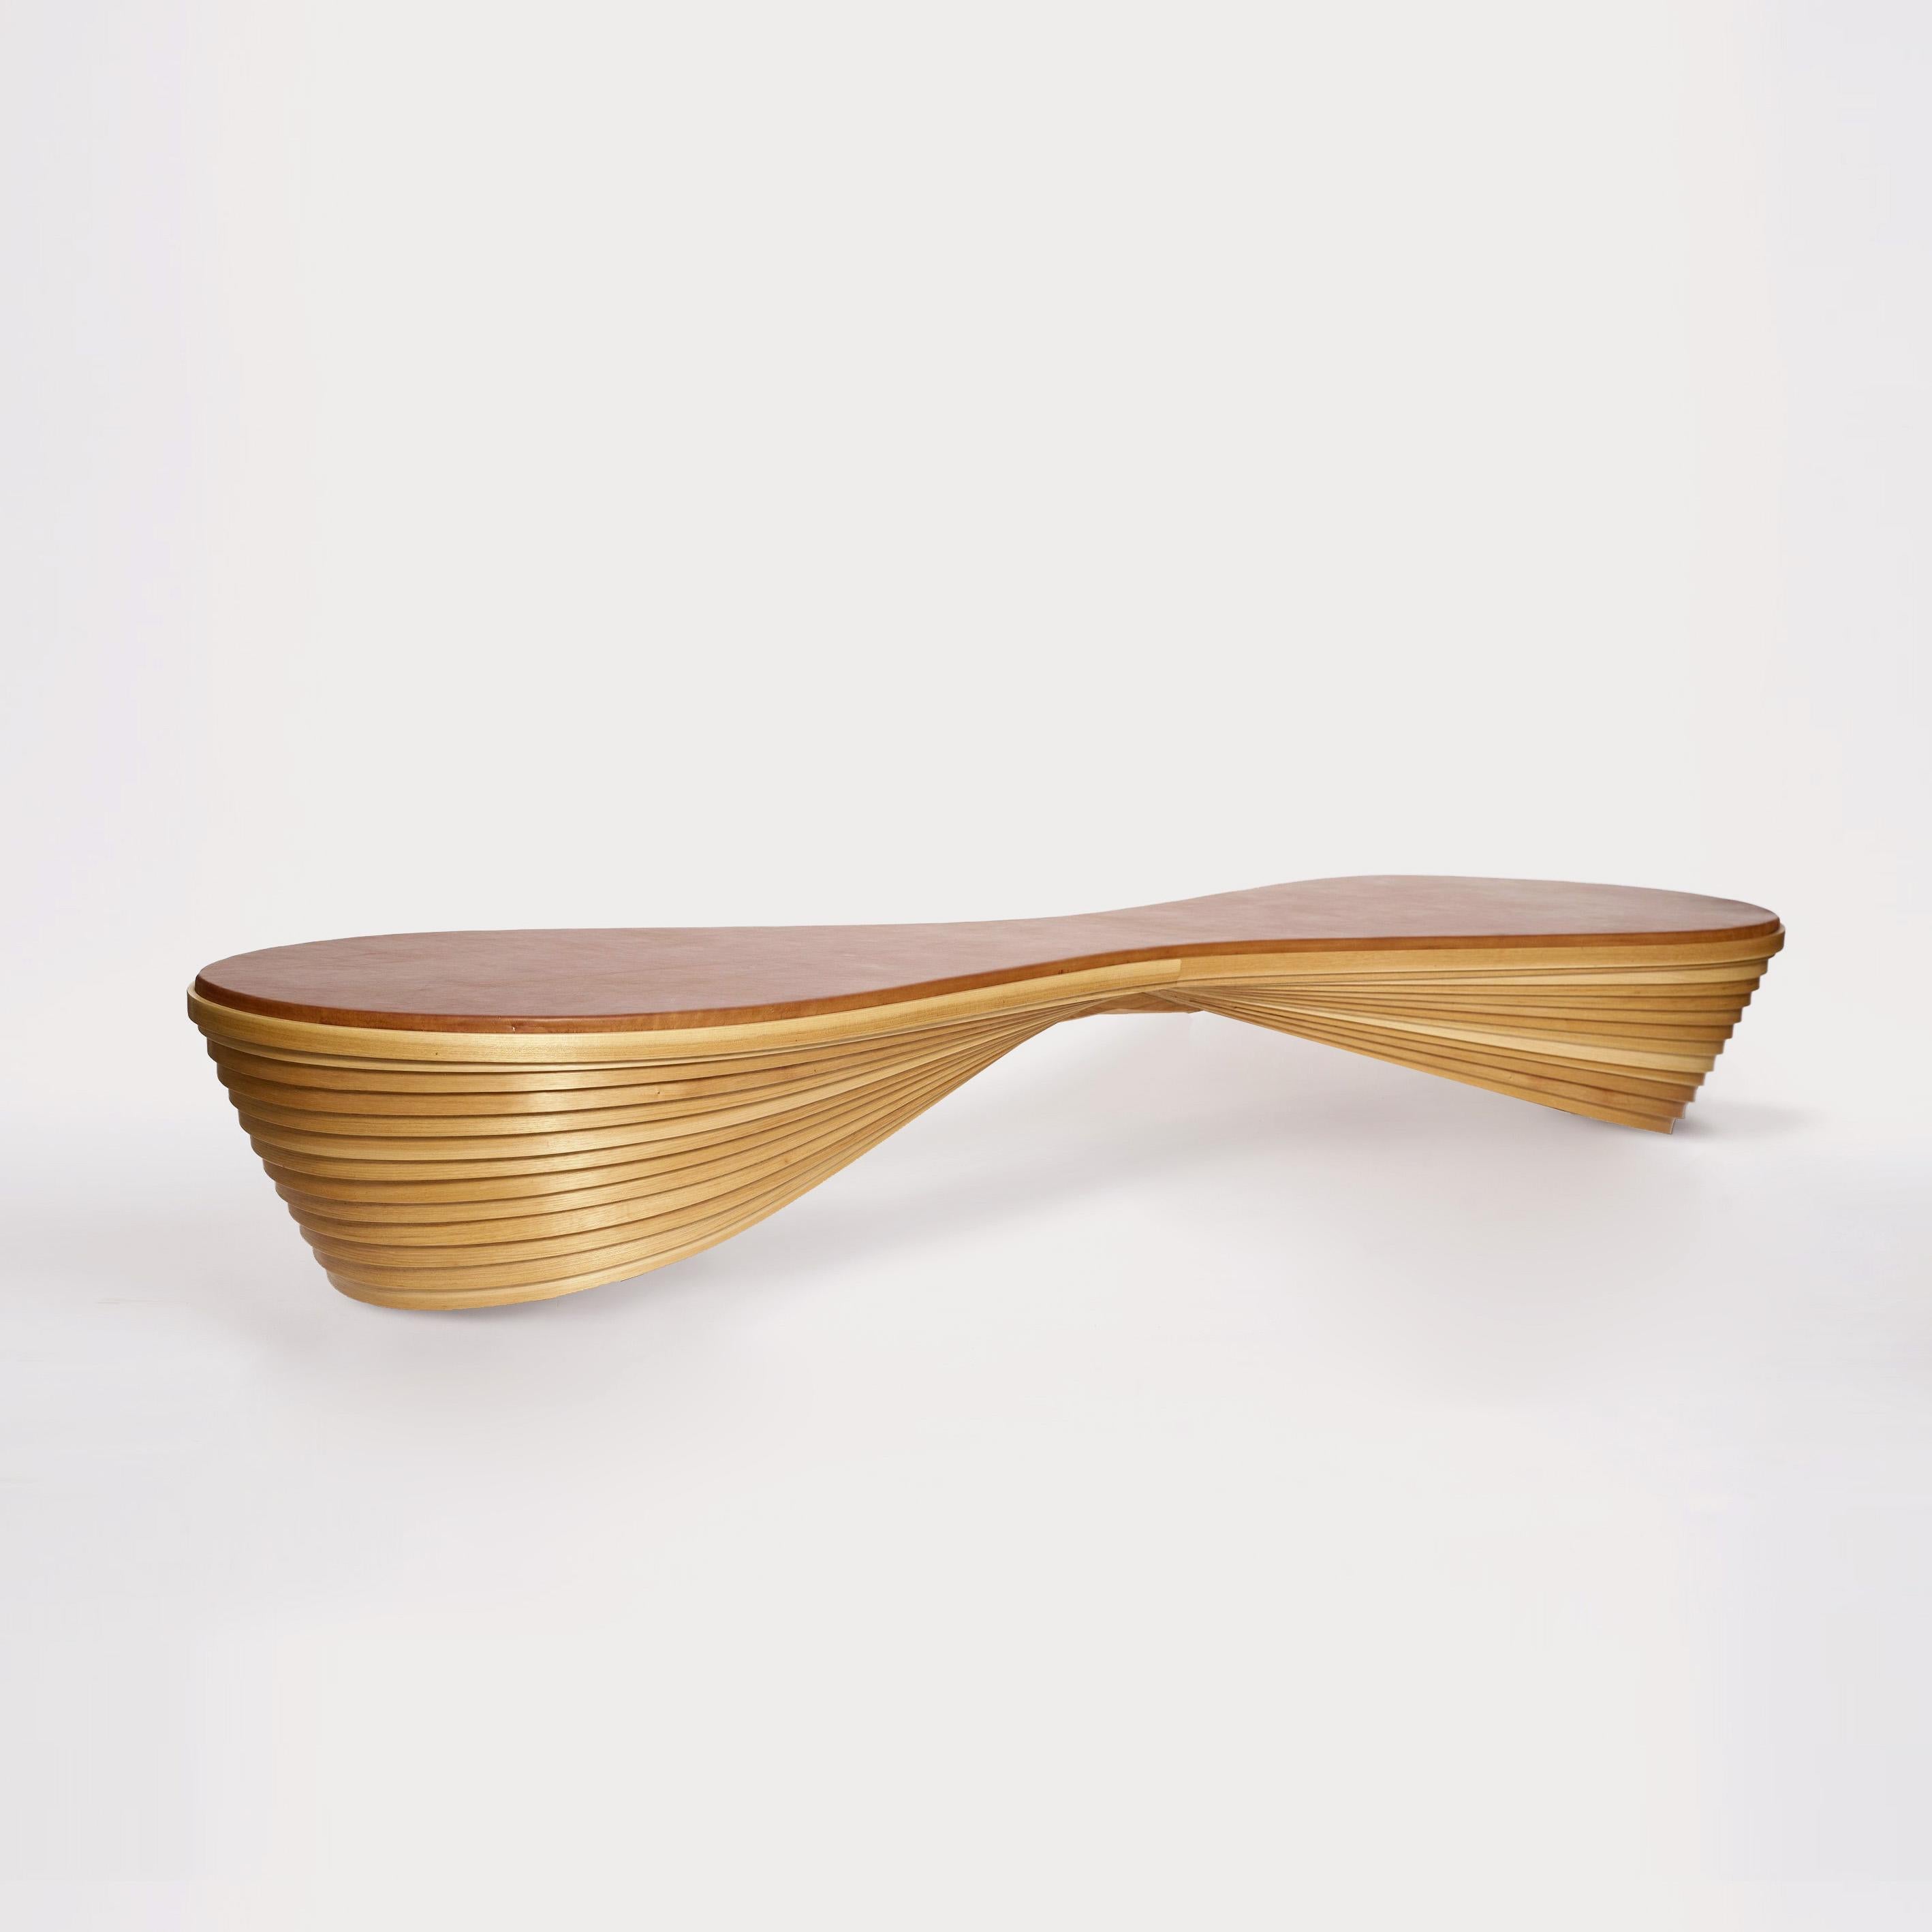 Le Bench is a steam-bent hickory bench. The bent hoops, inspired by Le Nid, are assembled in a tight overlapping stack, topped with a leather cushion, and mounted on hidden metal legs.